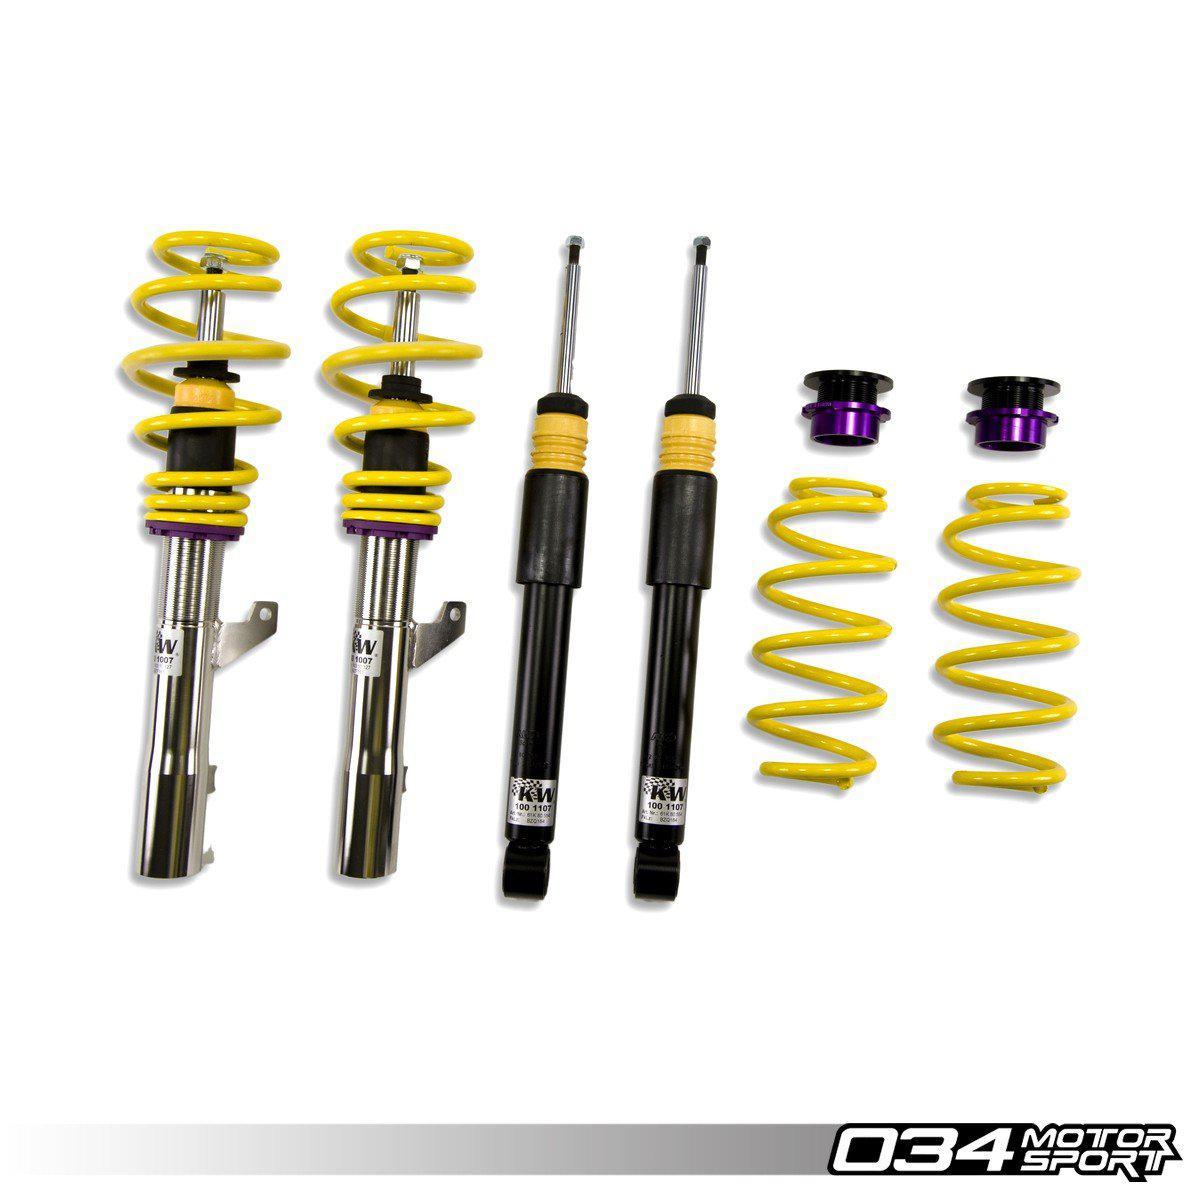 KW Variant 2 Coilover Suspension, MKVII Volkswagen GTI/Golf R With Dcc-A Little Tuning Co